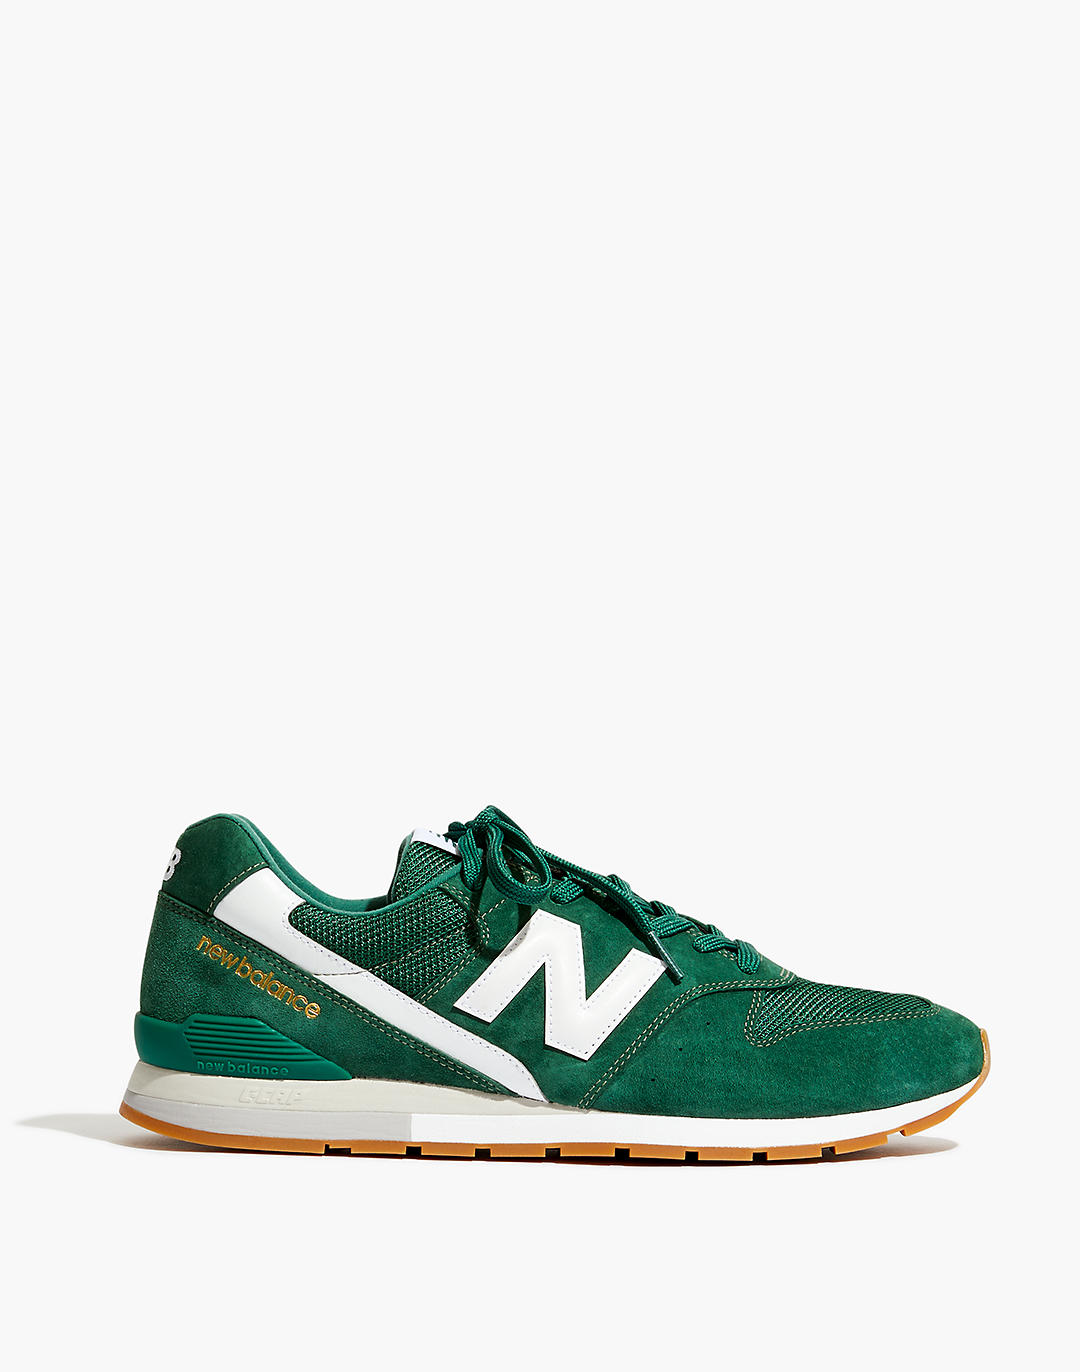 New Balance® Leather 996 Sneakers in Forest Green